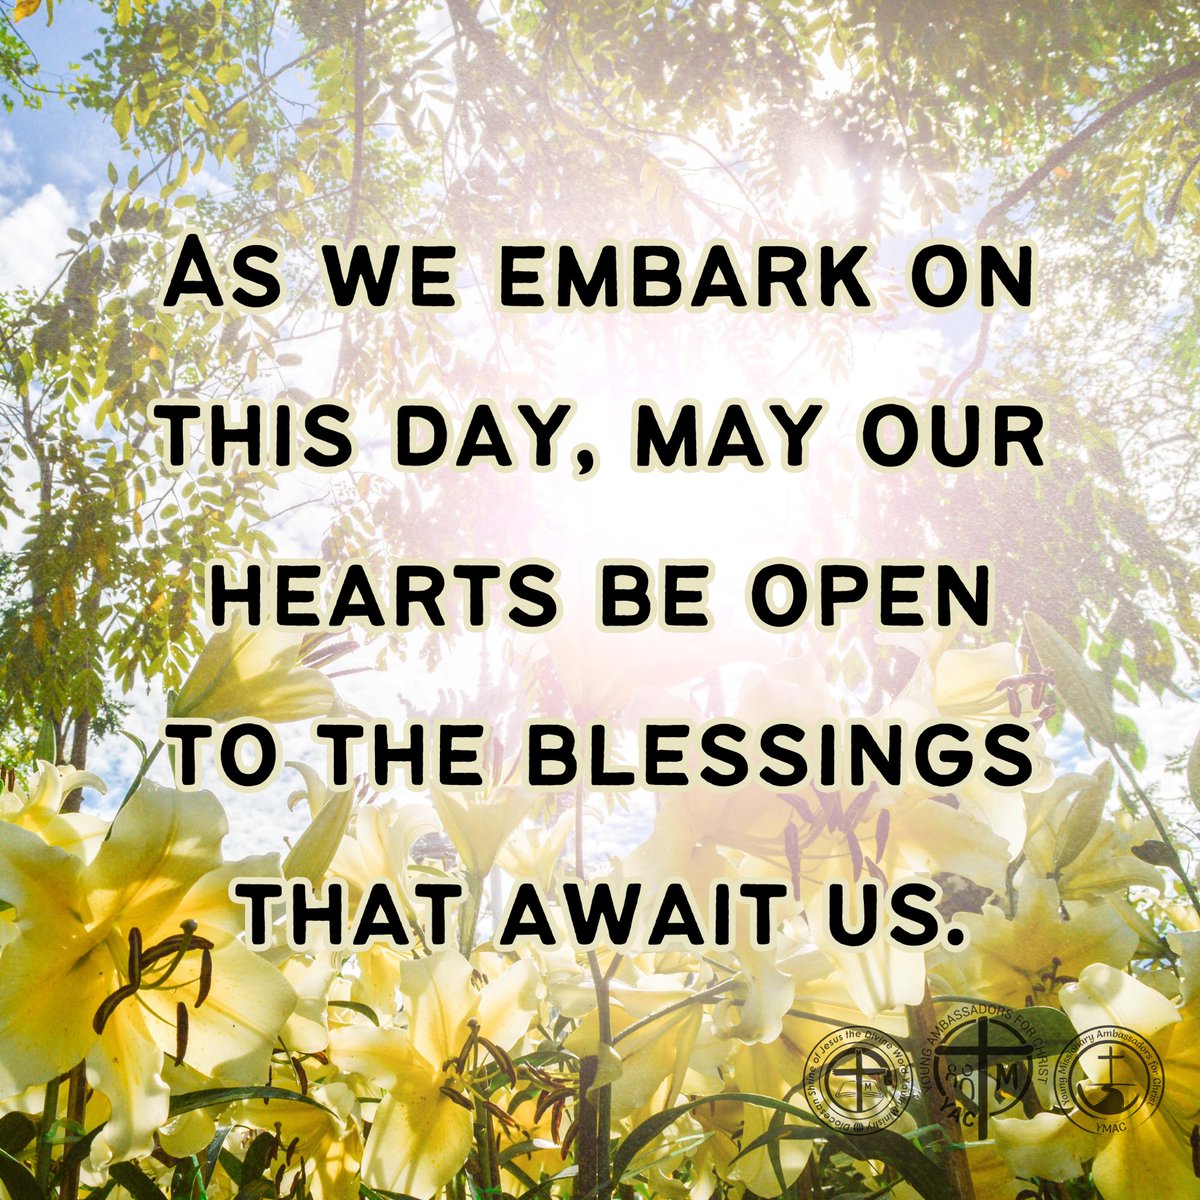 Friends, as we embark on this day, may our hearts be open to the blessings that await us.

#MorningReflections #EmbracingTheLight #InnerPeace #RenewalOfSpirit #HopefulHearts #SpreadLove #NurturingSouls #GratefulForToday #YAC #YMAC #SYM #SVDyouth 
#SHRINEyouthMinistry #ShrineYouth